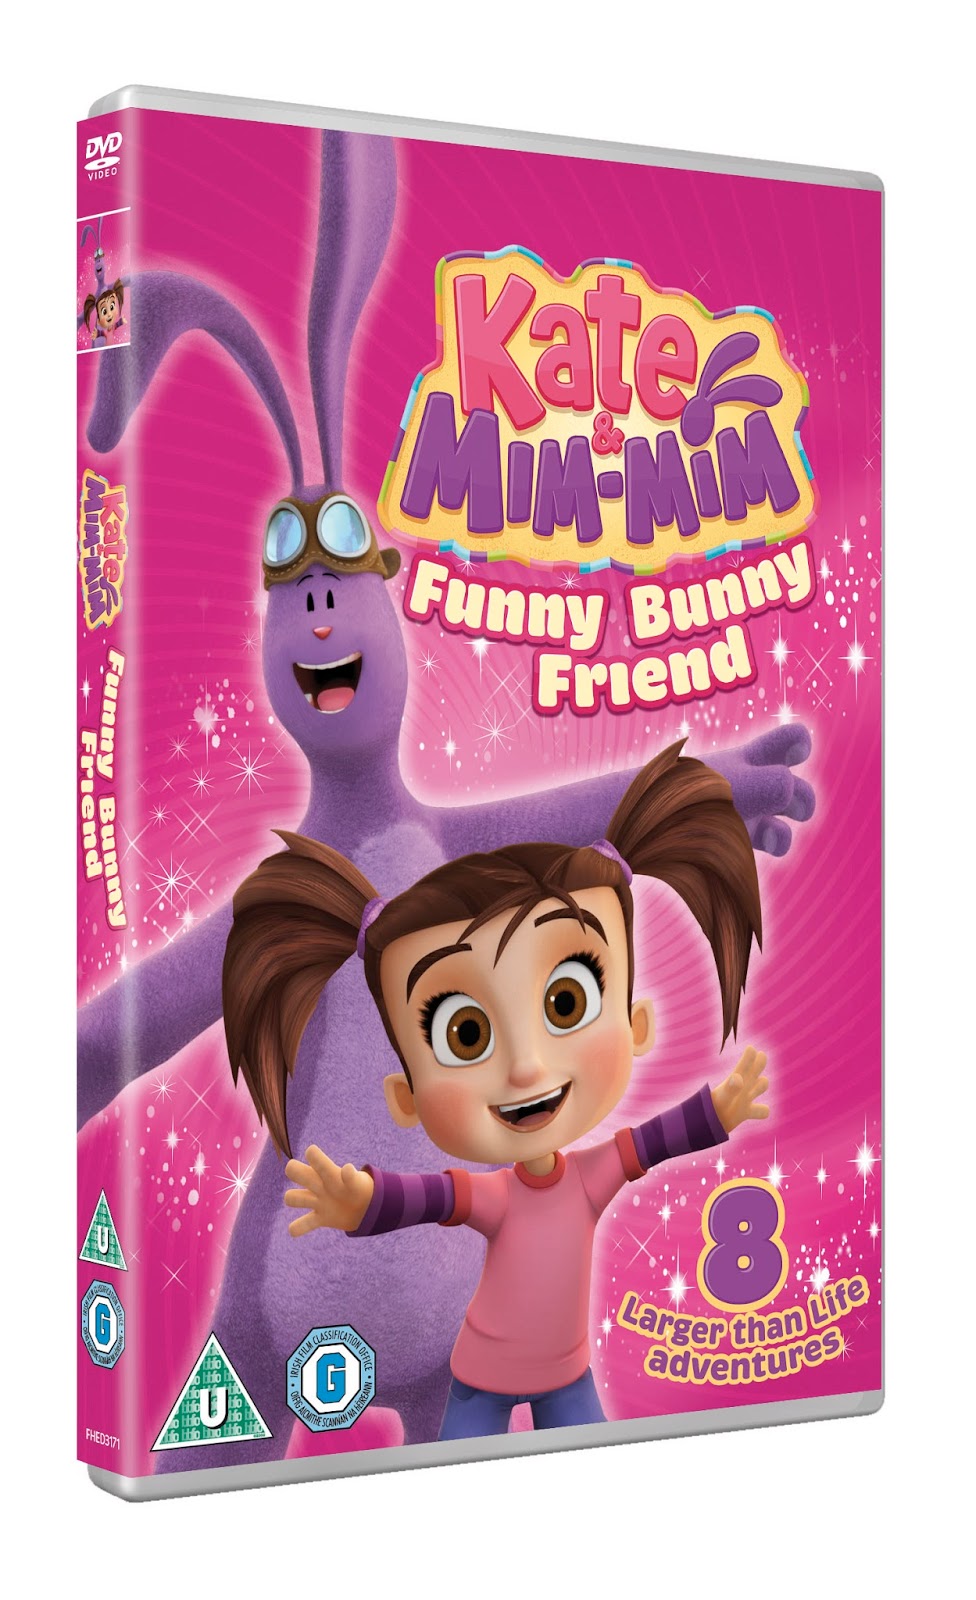 Kate and Mim-Mim: Funny Bunny Friend on DVD - Review and Giveaway